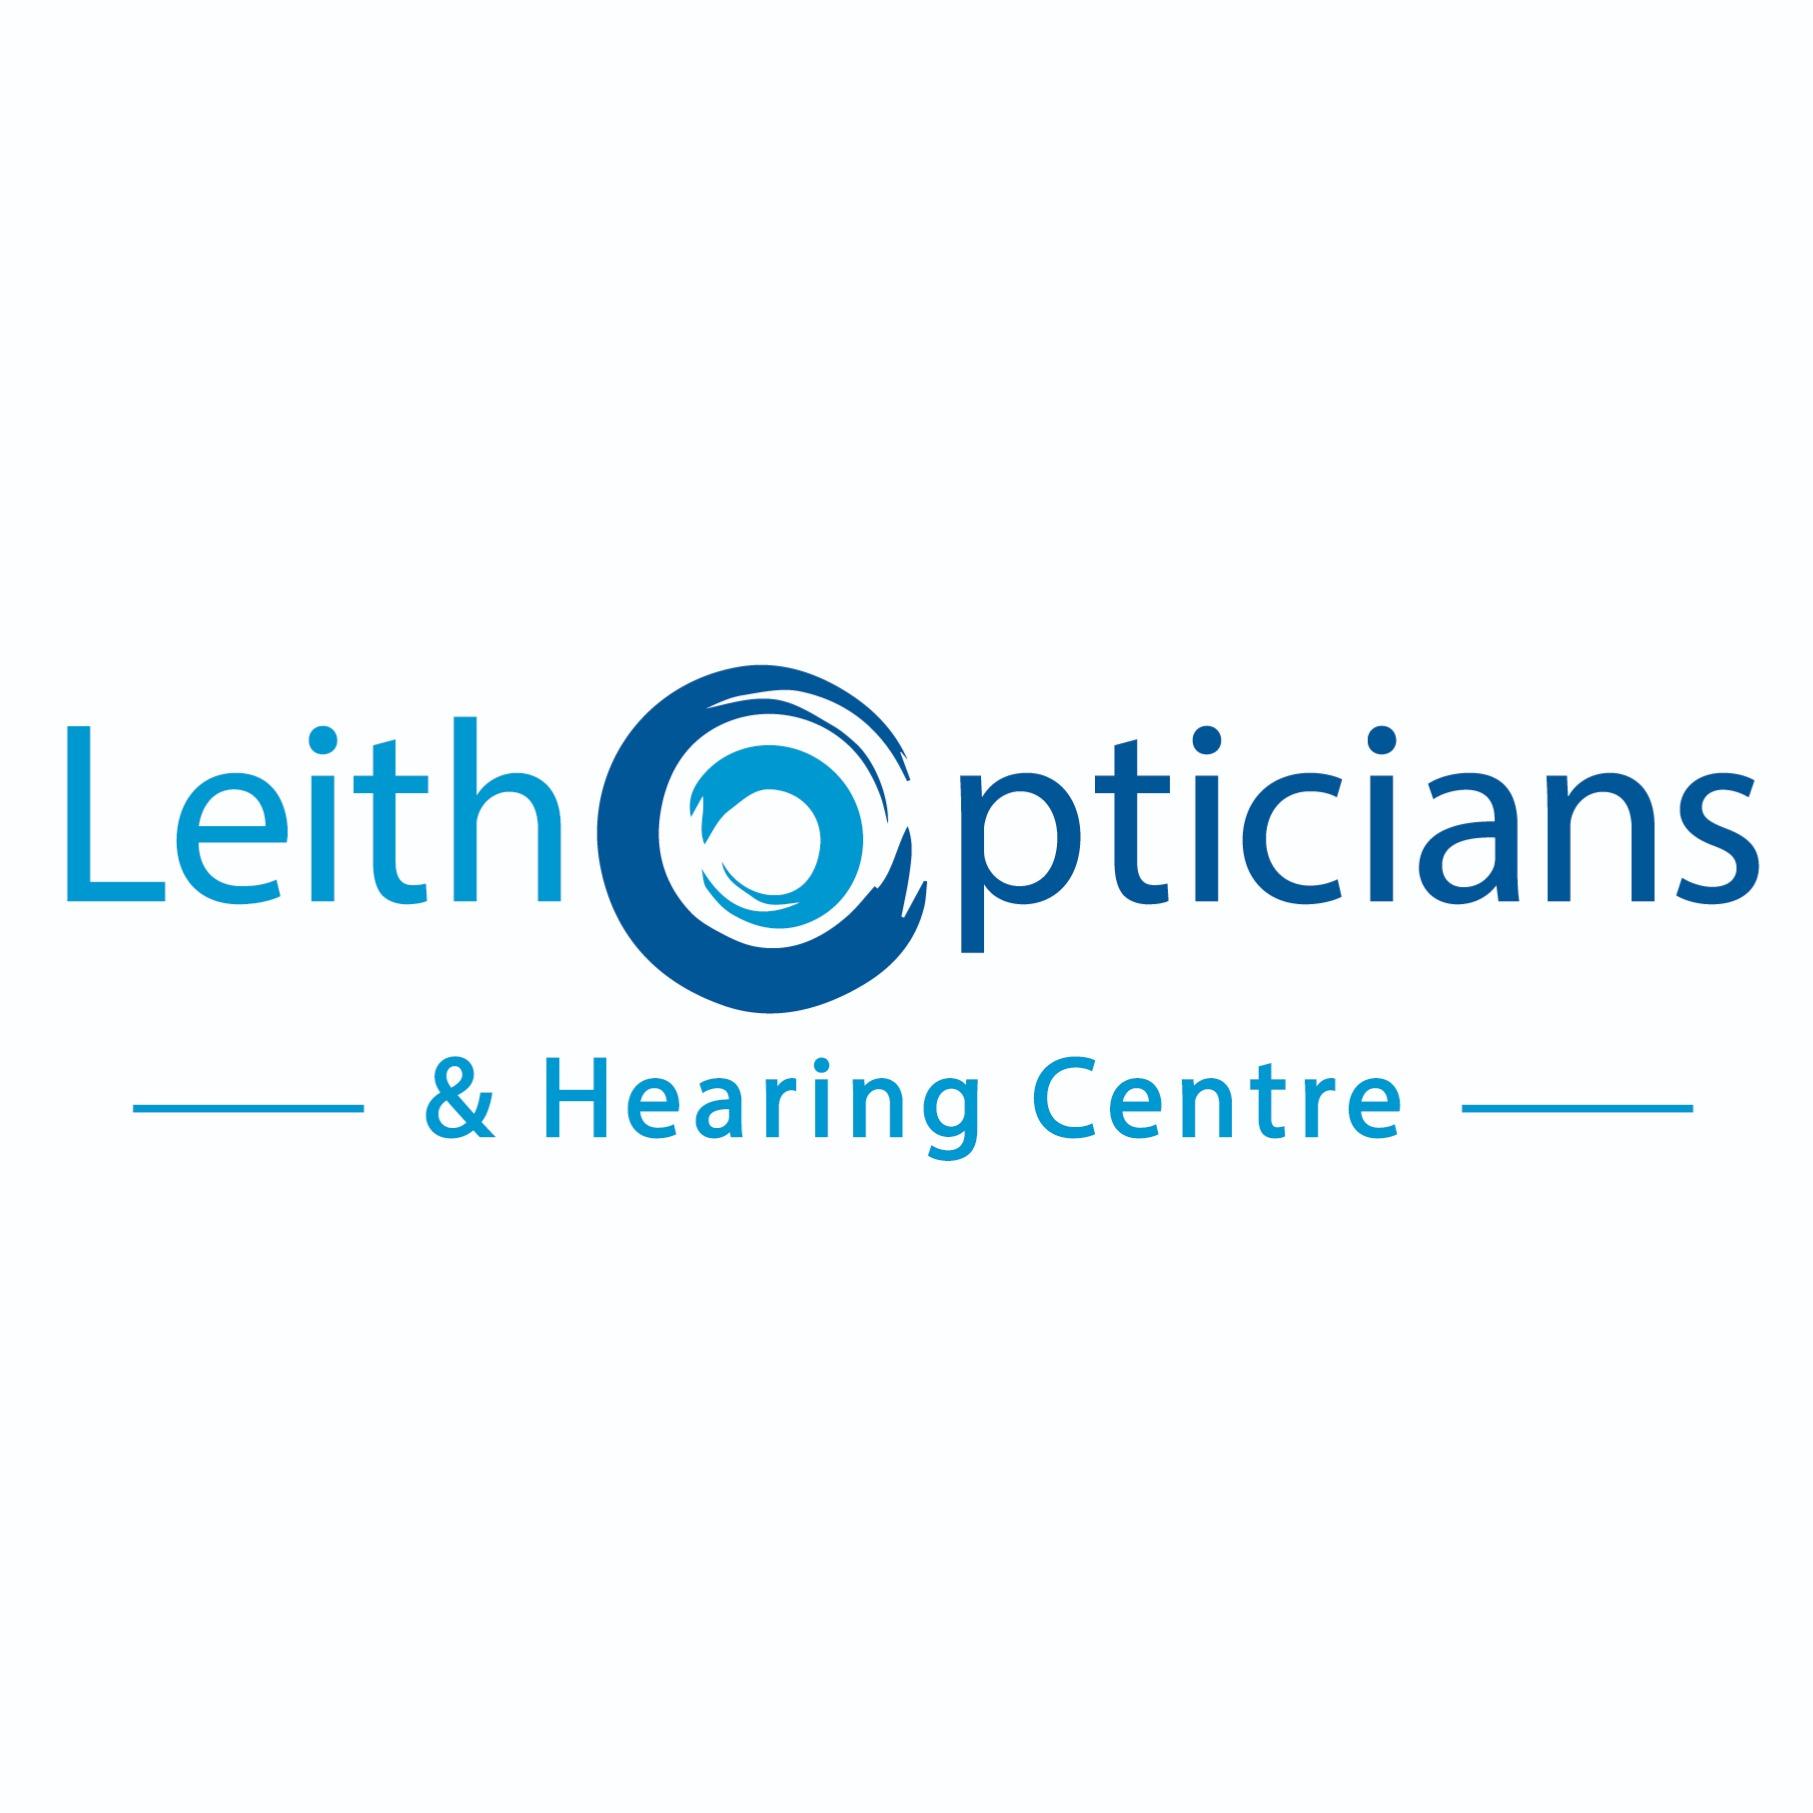 Leith Opticians & Hearing Centre Pinner (Eye Tests | Hearing Tests | Ear Wax Removal) Pinner 020 8868 2277